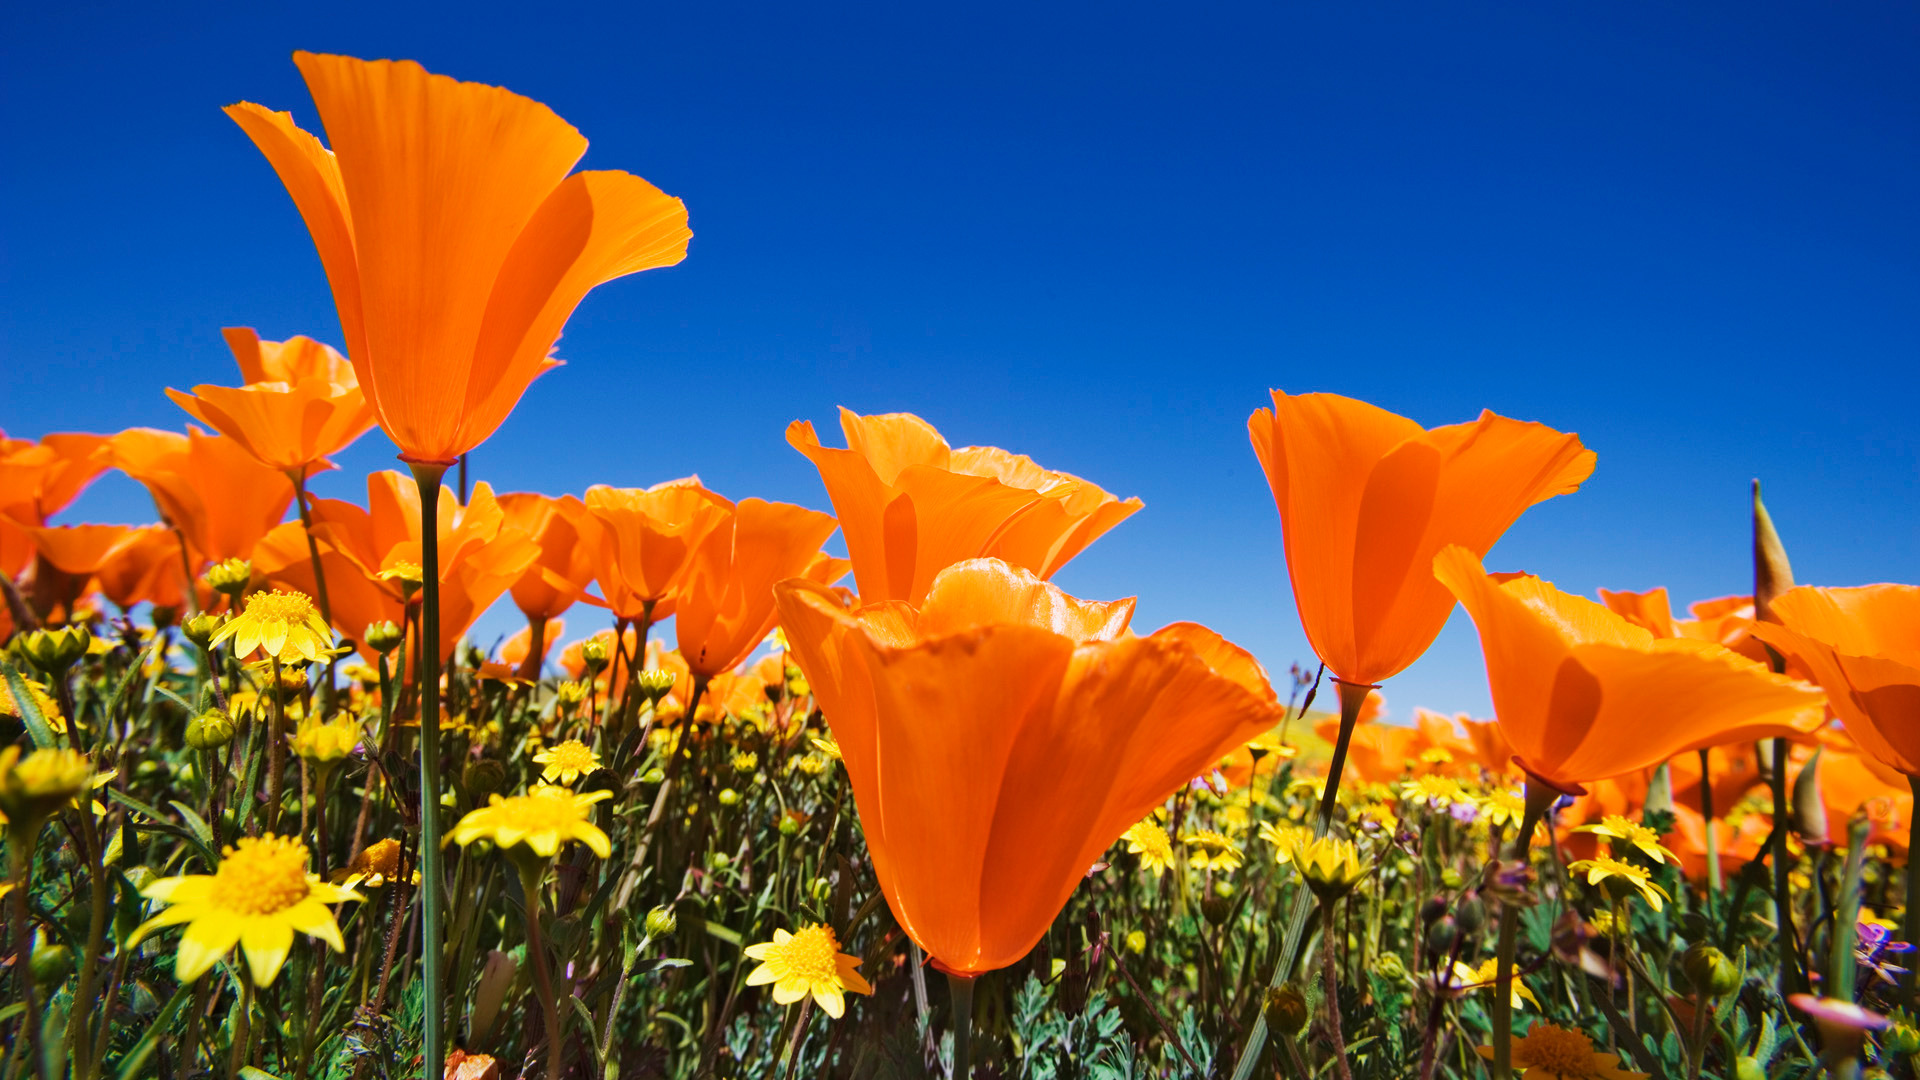 Poppy Flowers Nature wallpaper  Download TOP Free wallpapers